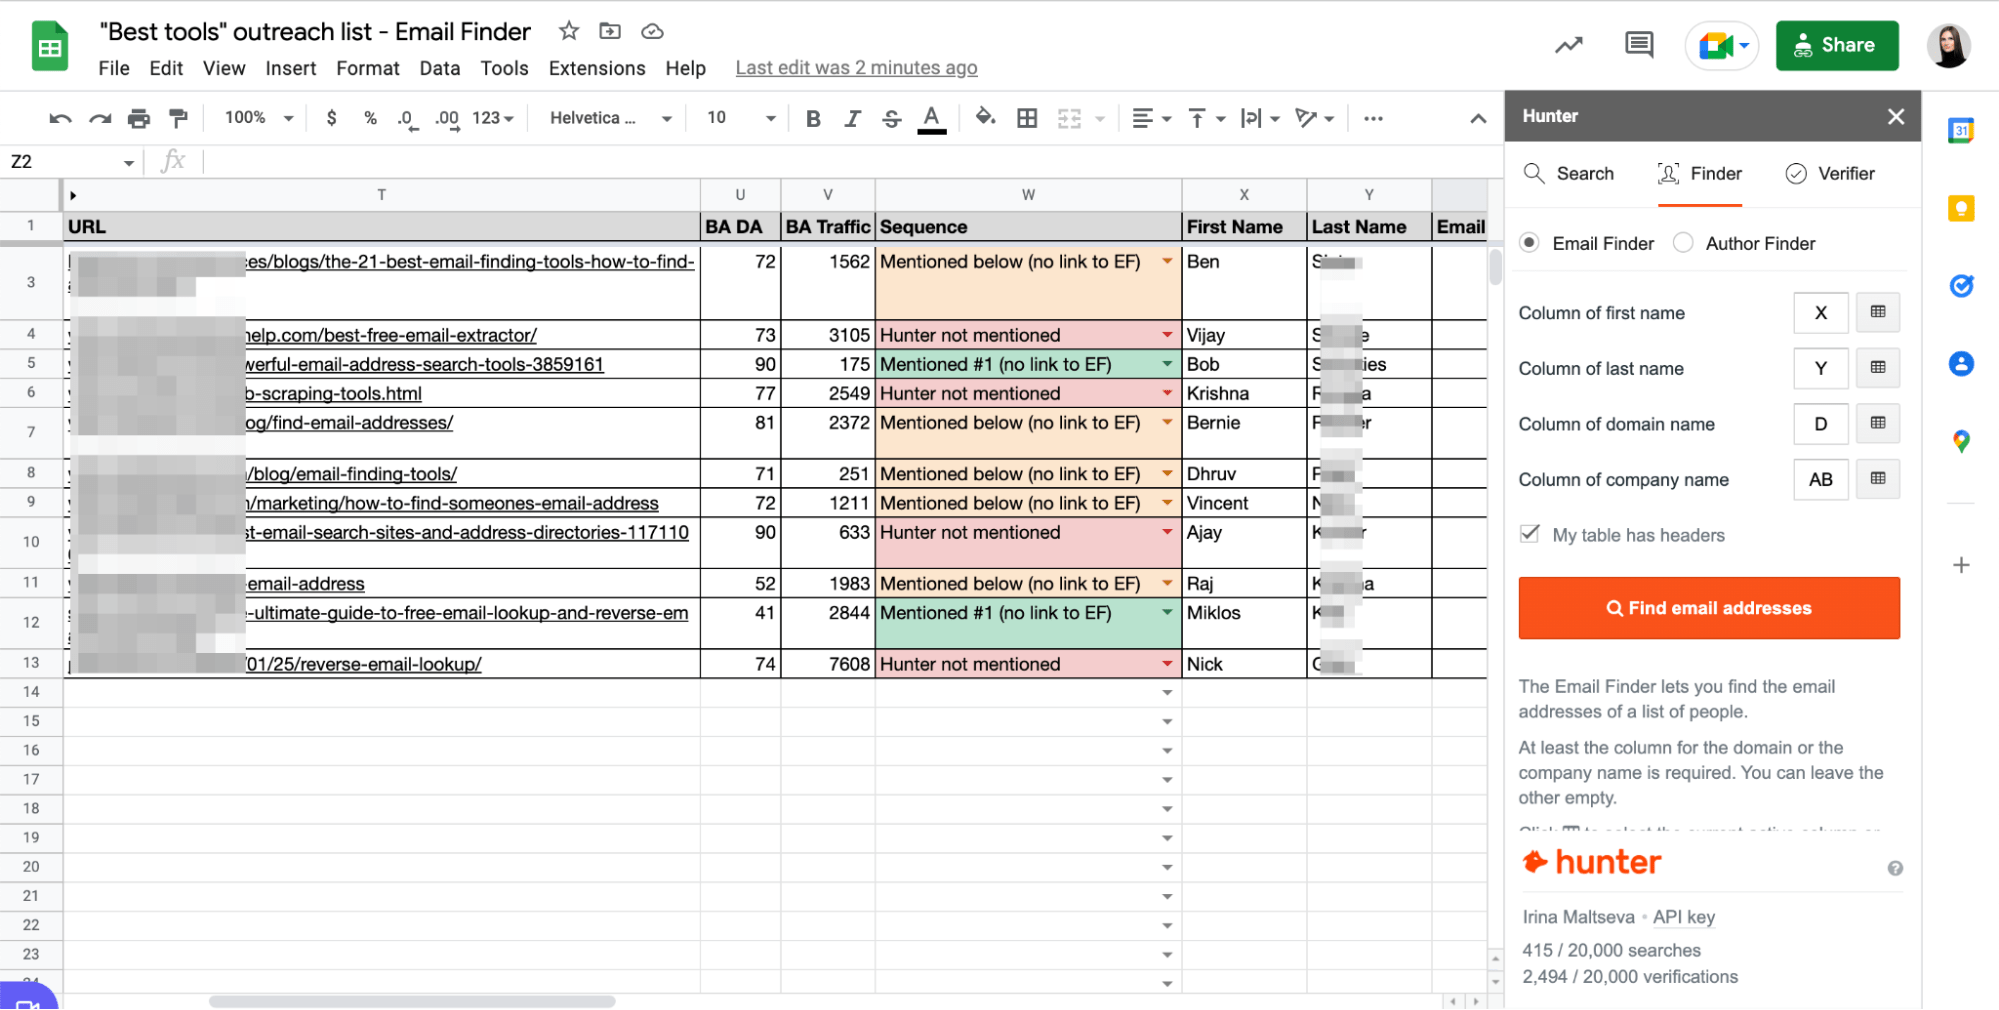 Using Hunter's Google Sheets add-on to find email addresses
